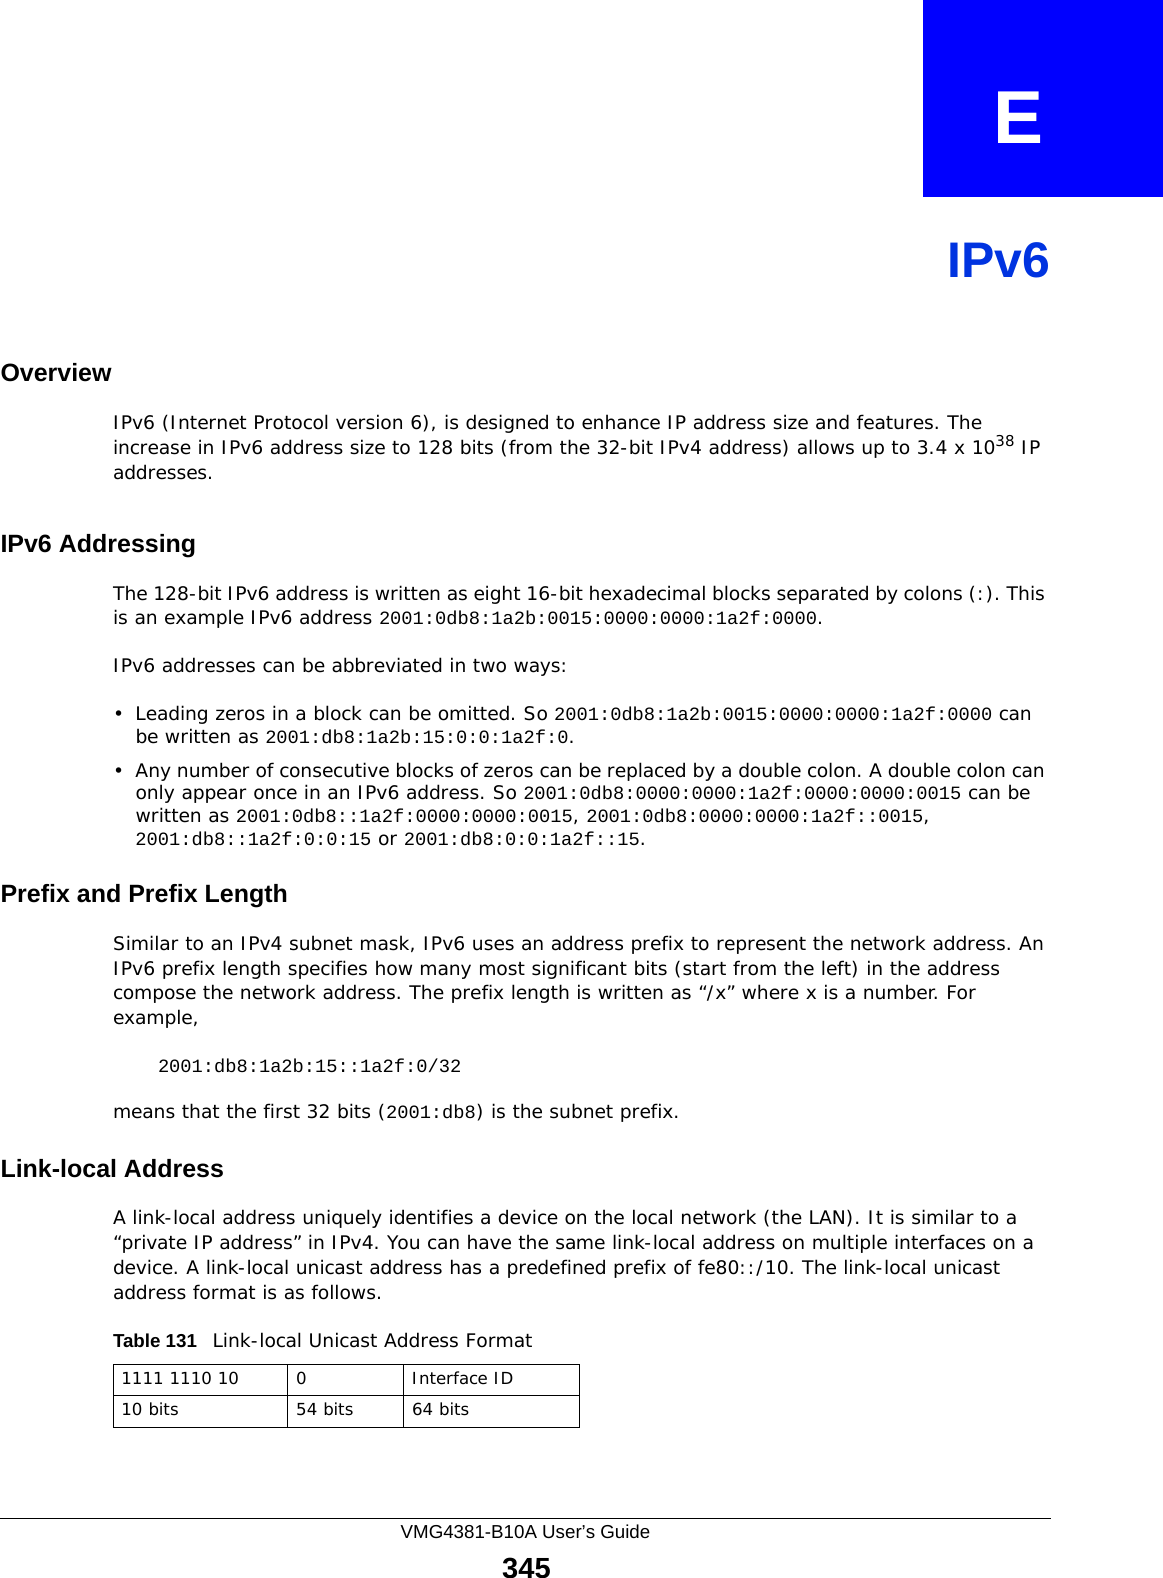 VMG4381-B10A User’s Guide345APPENDIX   EIPv6OverviewIPv6 (Internet Protocol version 6), is designed to enhance IP address size and features. The increase in IPv6 address size to 128 bits (from the 32-bit IPv4 address) allows up to 3.4 x 1038 IP addresses. IPv6 AddressingThe 128-bit IPv6 address is written as eight 16-bit hexadecimal blocks separated by colons (:). This is an example IPv6 address 2001:0db8:1a2b:0015:0000:0000:1a2f:0000. IPv6 addresses can be abbreviated in two ways:• Leading zeros in a block can be omitted. So 2001:0db8:1a2b:0015:0000:0000:1a2f:0000 can be written as 2001:db8:1a2b:15:0:0:1a2f:0. • Any number of consecutive blocks of zeros can be replaced by a double colon. A double colon can only appear once in an IPv6 address. So 2001:0db8:0000:0000:1a2f:0000:0000:0015 can be written as 2001:0db8::1a2f:0000:0000:0015, 2001:0db8:0000:0000:1a2f::0015, 2001:db8::1a2f:0:0:15 or 2001:db8:0:0:1a2f::15.Prefix and Prefix LengthSimilar to an IPv4 subnet mask, IPv6 uses an address prefix to represent the network address. An IPv6 prefix length specifies how many most significant bits (start from the left) in the address compose the network address. The prefix length is written as “/x” where x is a number. For example, 2001:db8:1a2b:15::1a2f:0/32means that the first 32 bits (2001:db8) is the subnet prefix. Link-local AddressA link-local address uniquely identifies a device on the local network (the LAN). It is similar to a “private IP address” in IPv4. You can have the same link-local address on multiple interfaces on a device. A link-local unicast address has a predefined prefix of fe80::/10. The link-local unicast address format is as follows.Table 131   Link-local Unicast Address Format1111 1110 10 0 Interface ID10 bits 54 bits 64 bits